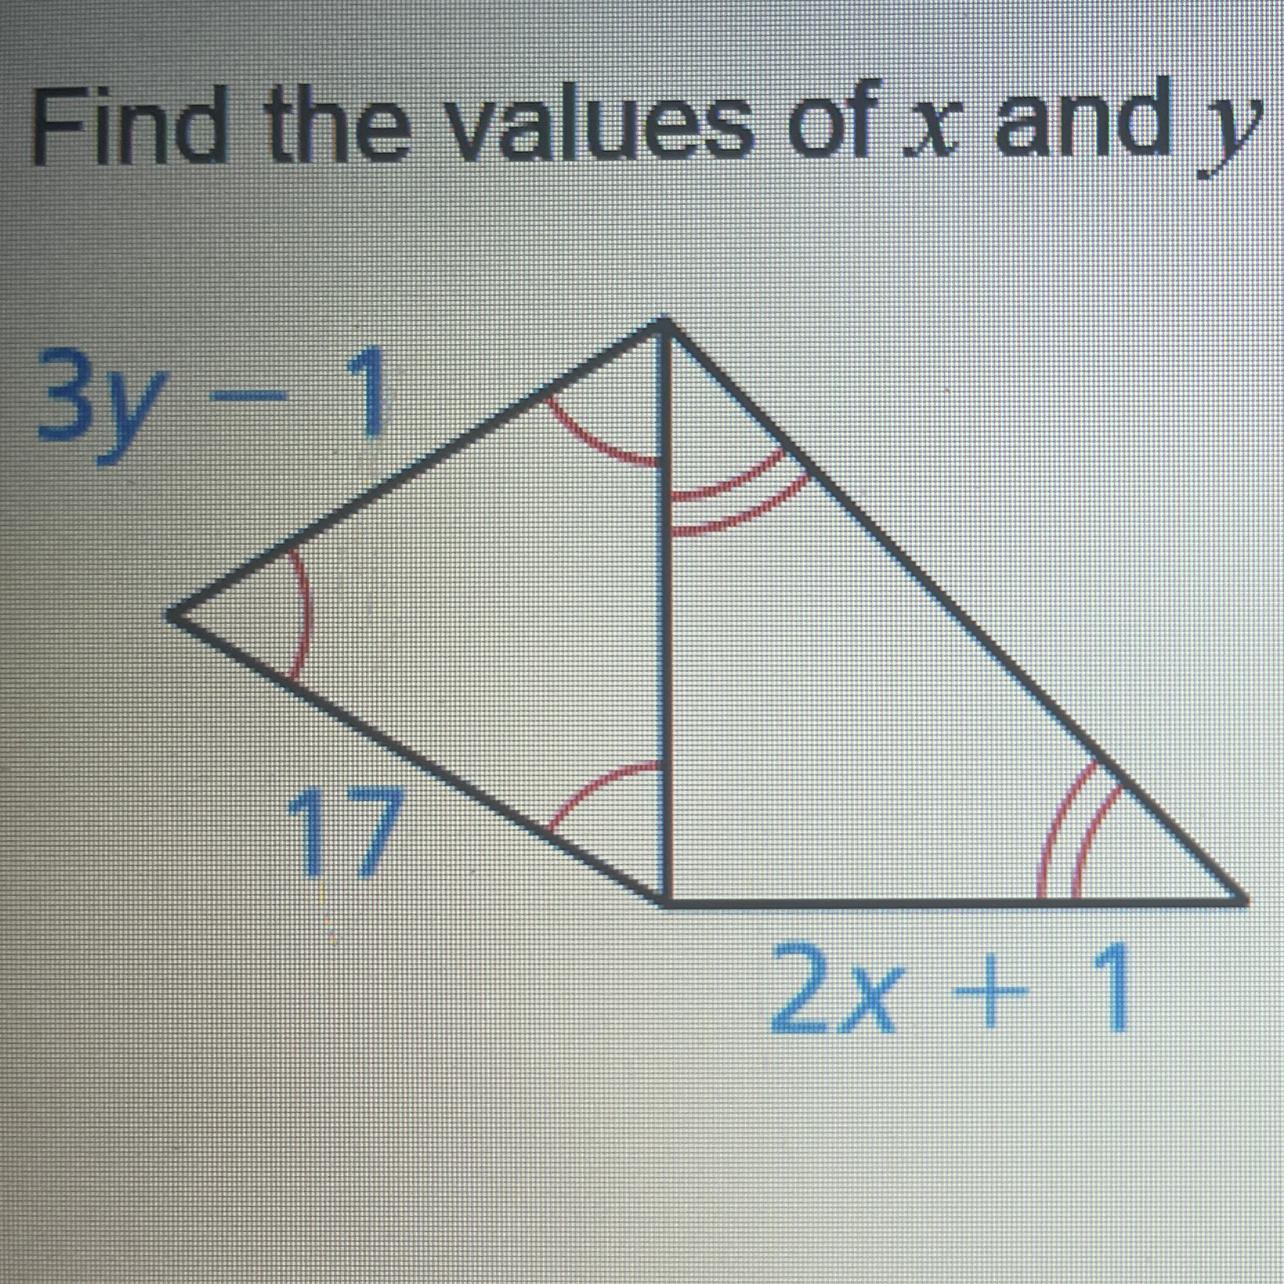 Find The Values Of X And Y In The Diagram